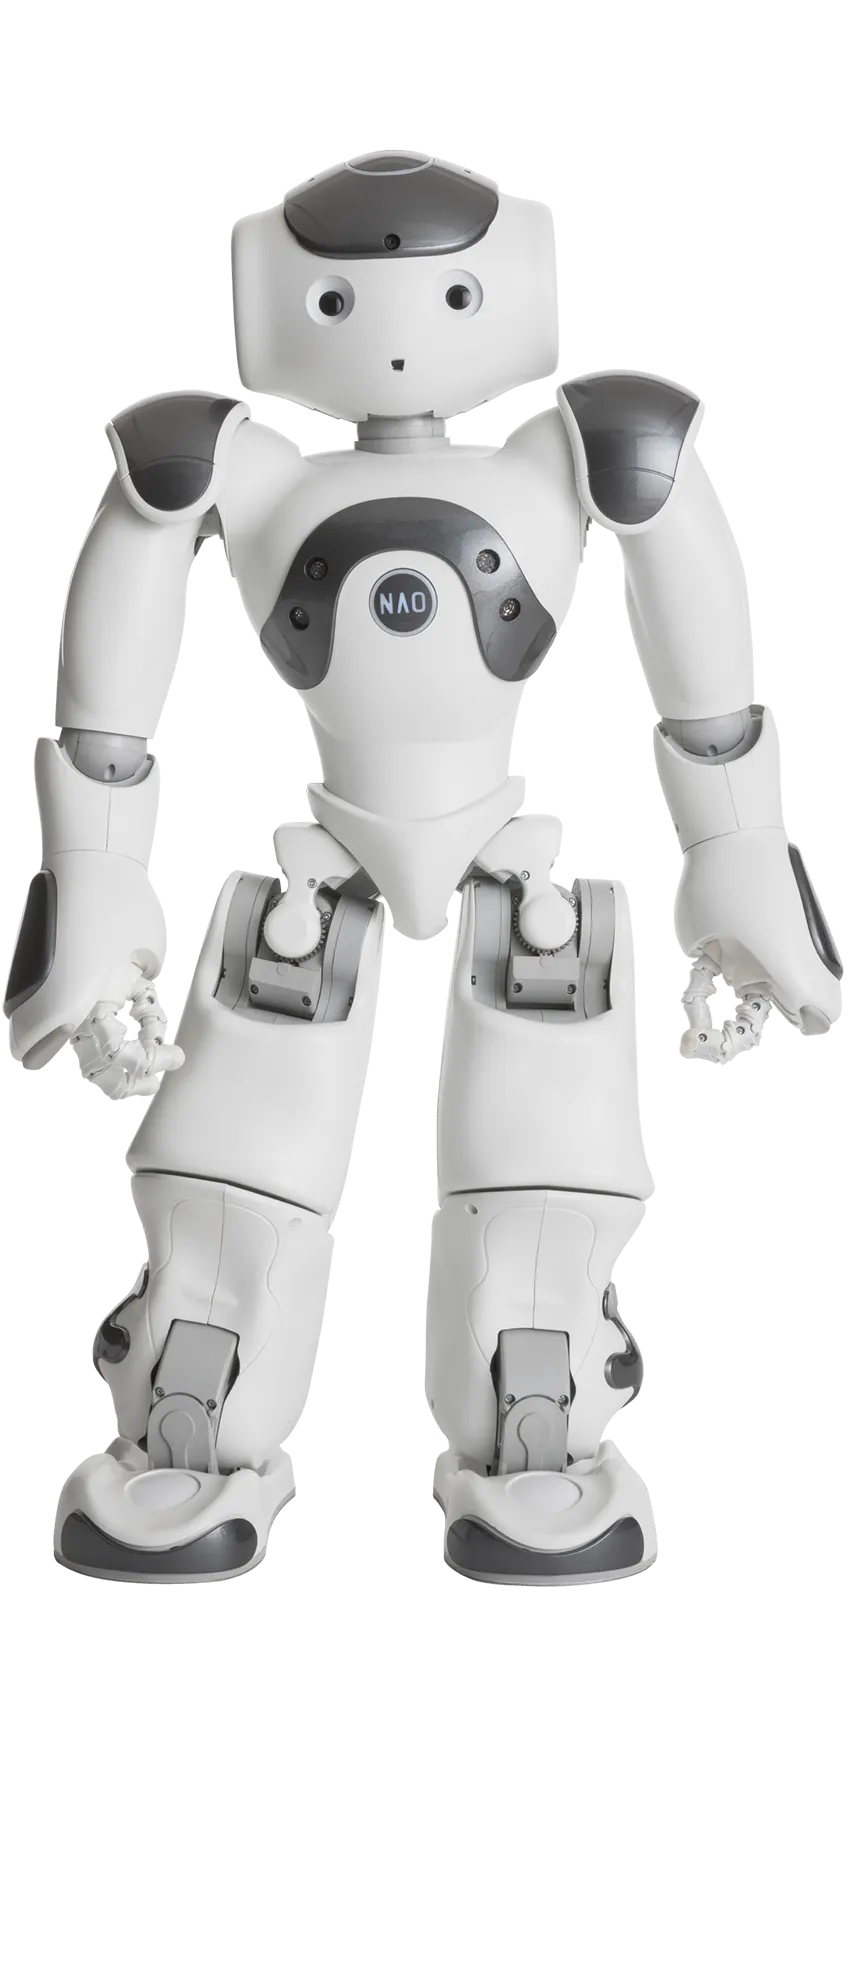 NAO robot - Front side